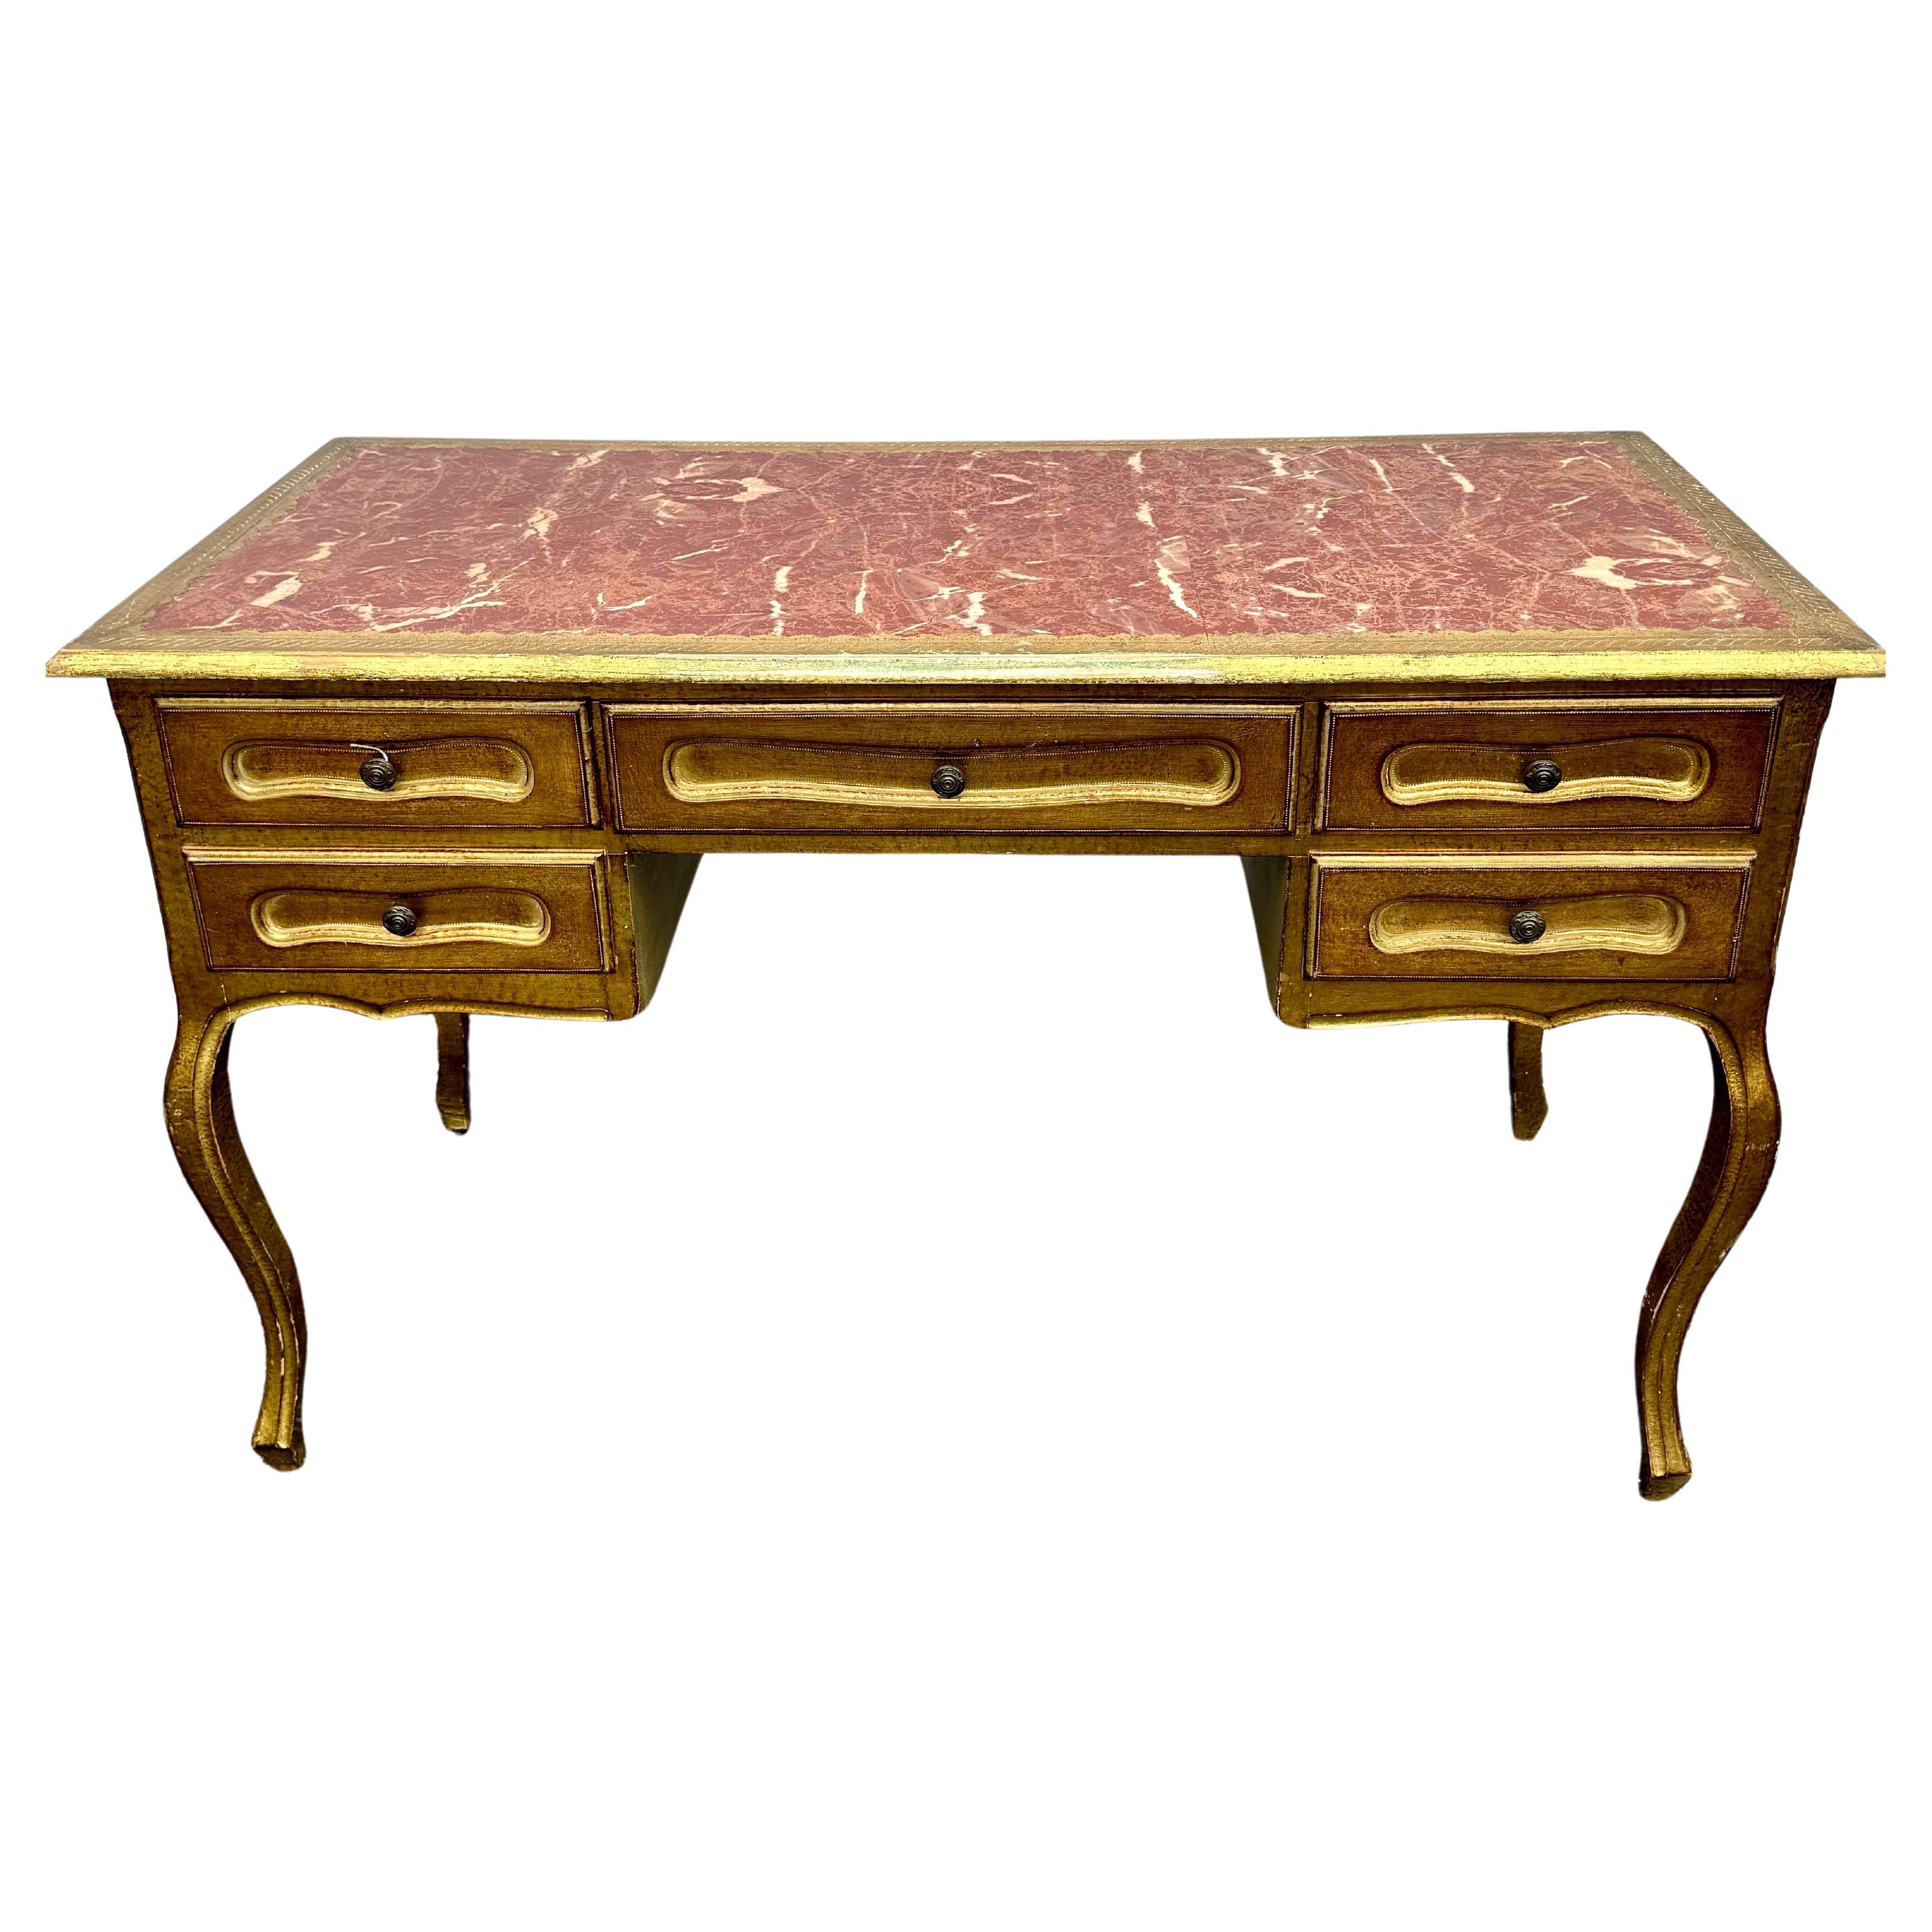 Italian Mid-Century Florentine Gilt Desk with Drawers For Sale